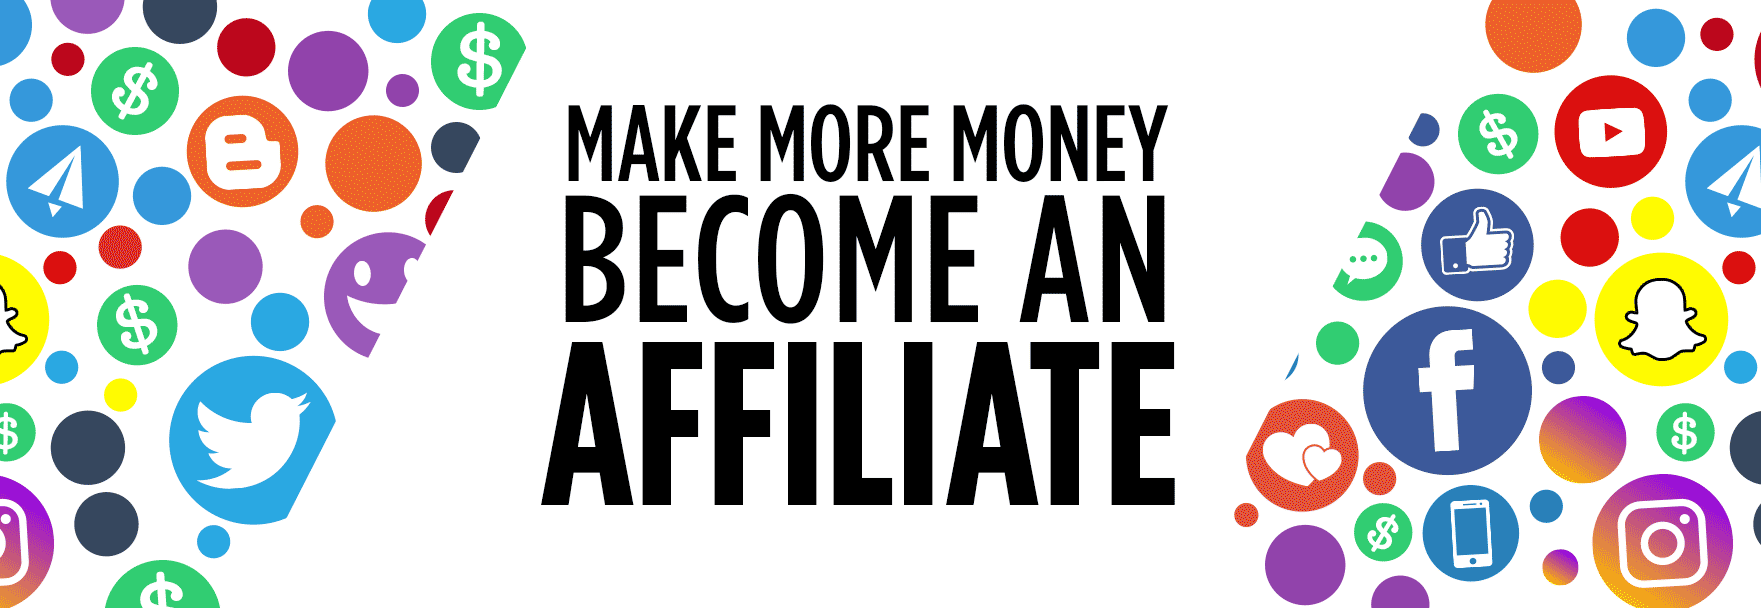 Become Affiliated! Offshoot Marketing Tips To Get Started